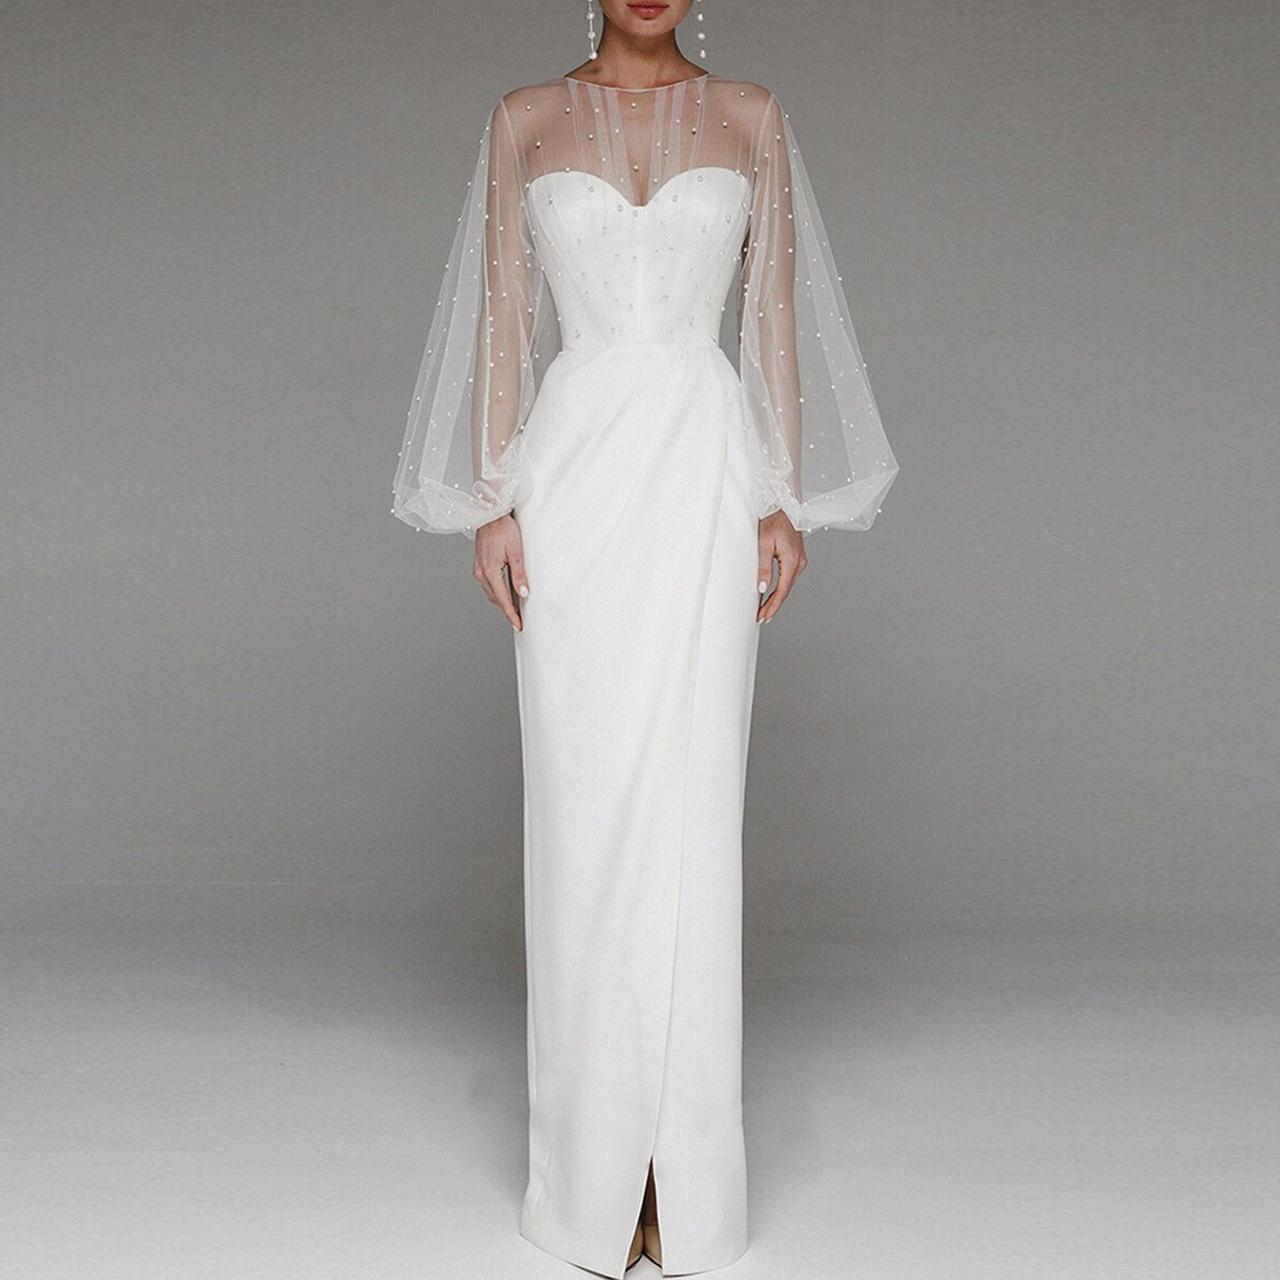 This Elegant Wedding Gown Is Perfect For Your Wedding + A Stylish Reception  Dress | KOKO Brides